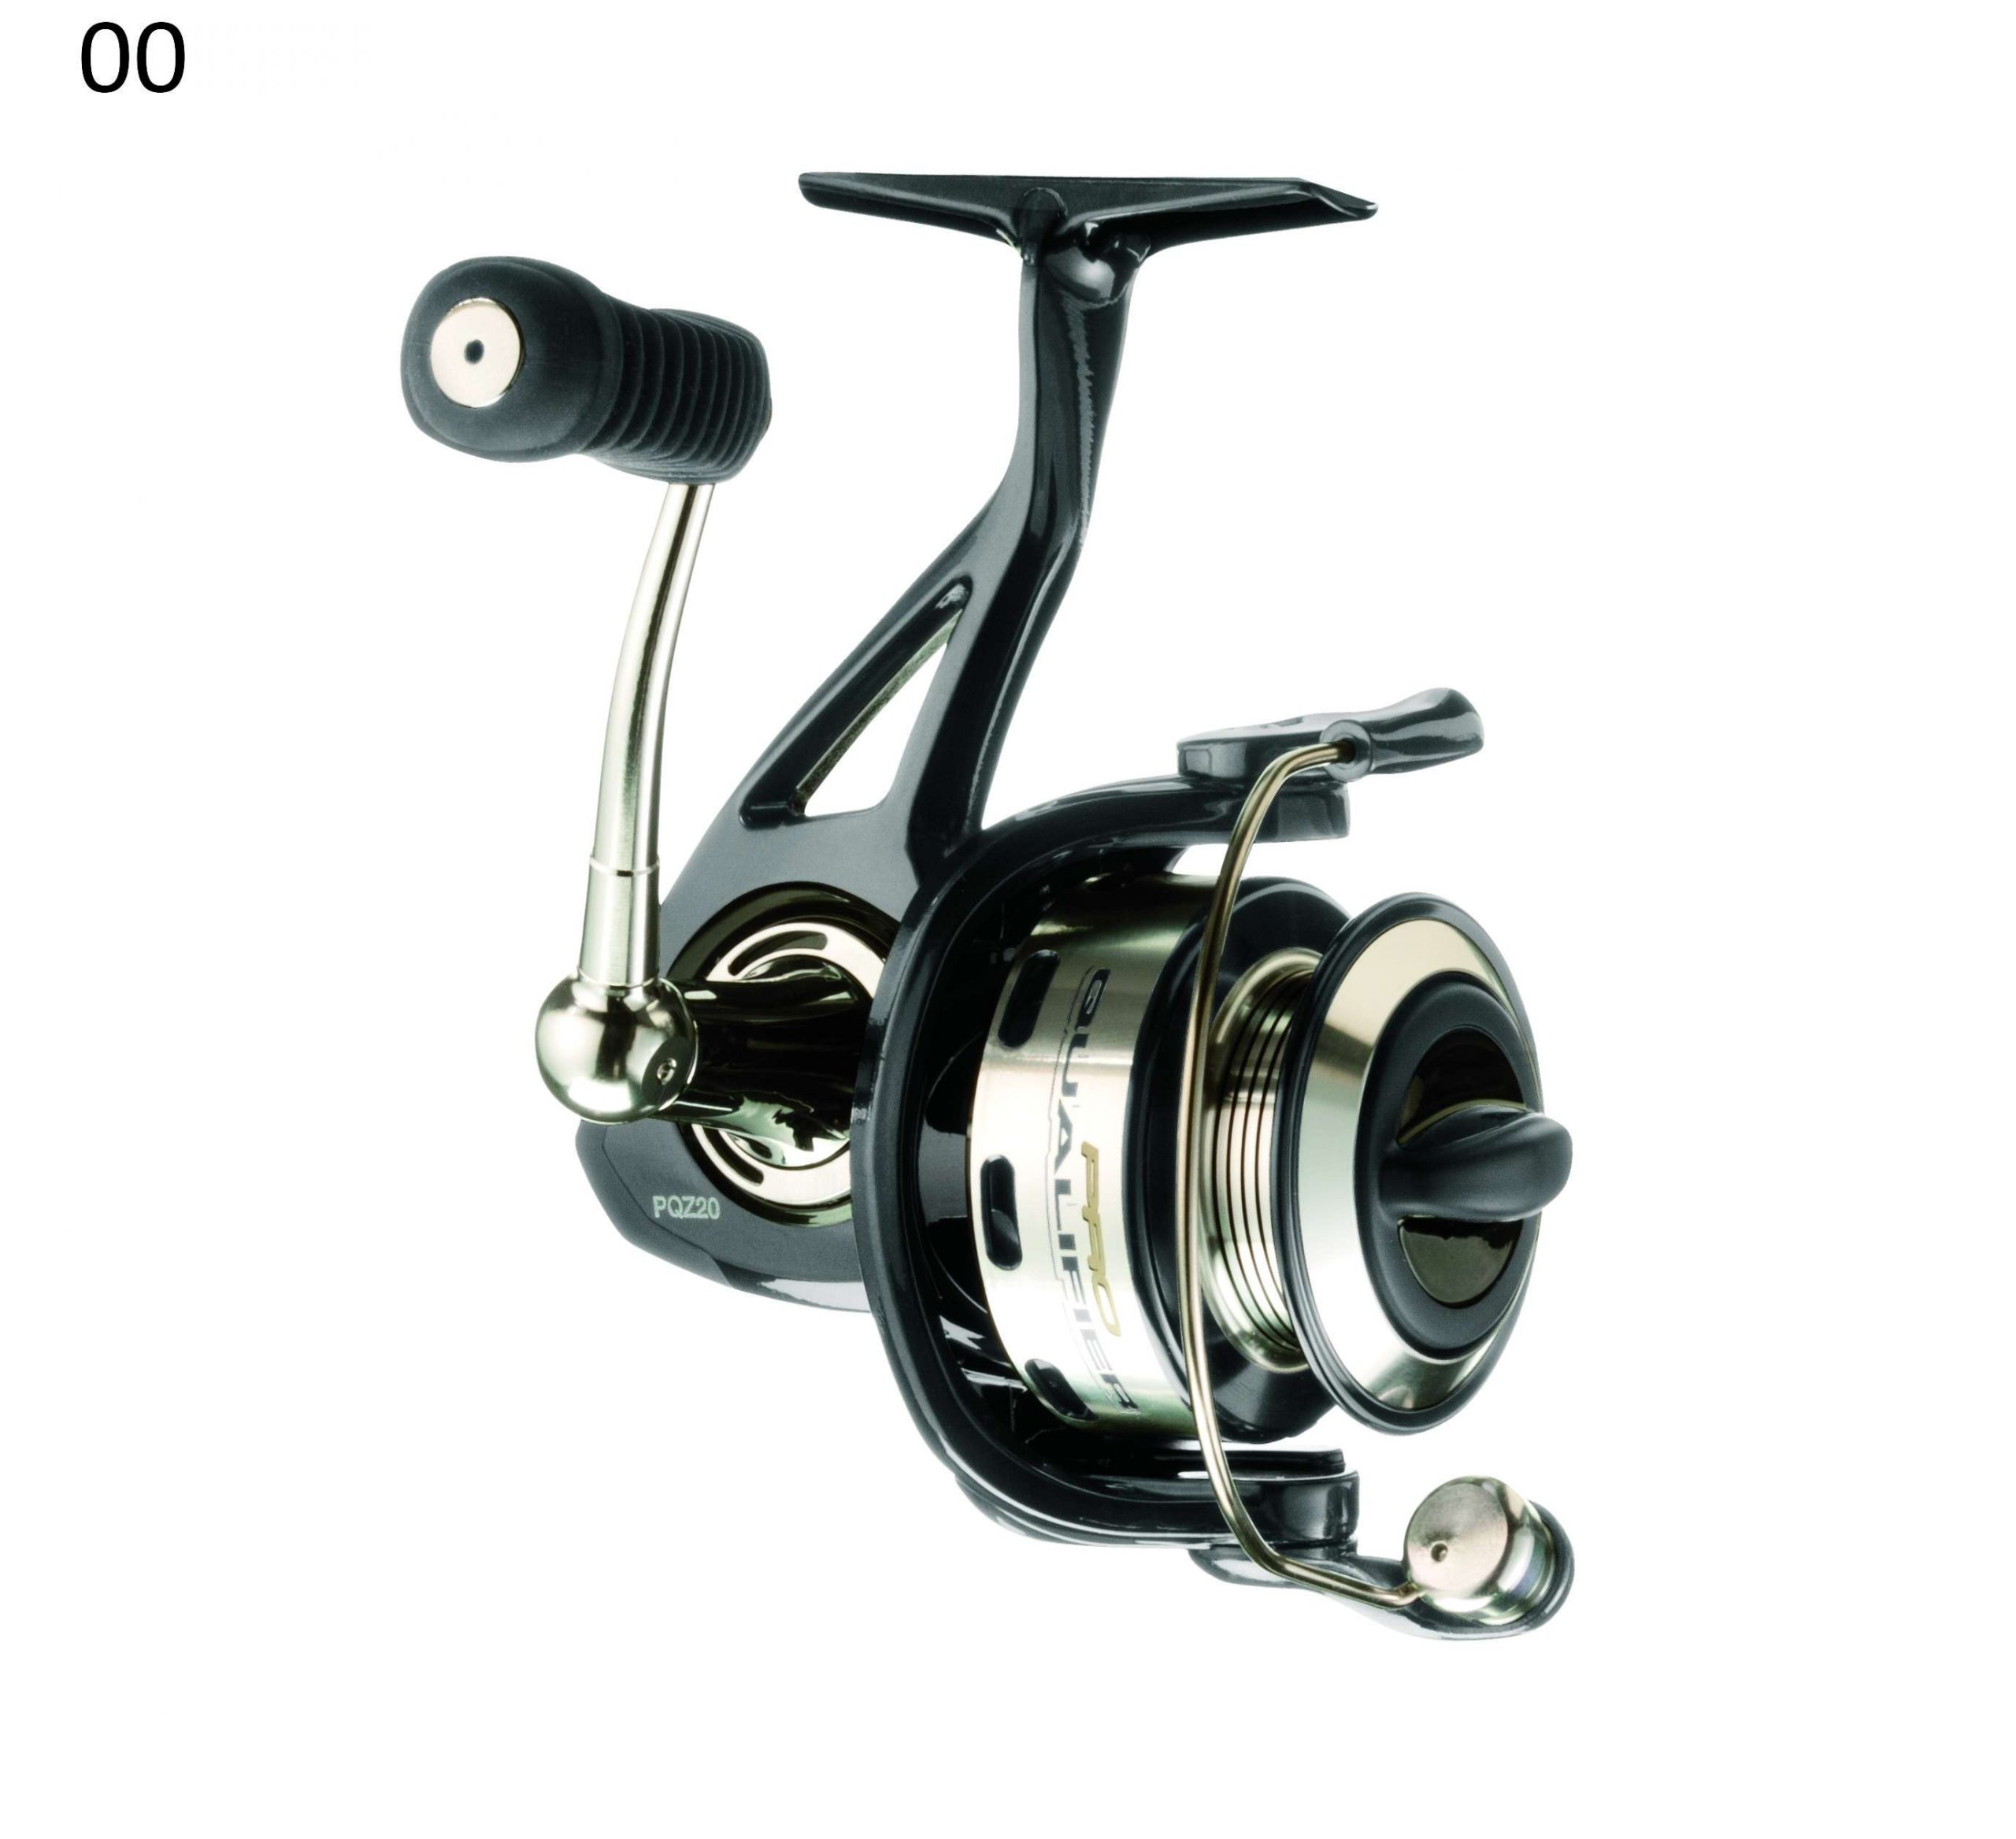 Fresh from the folks at Bass Pro Shops is the newest addition to their Pro Qualifier line, a spinning reel that's designed to cut down on the annoying aspects of fishing with light tackle, such as line twist and line wear.